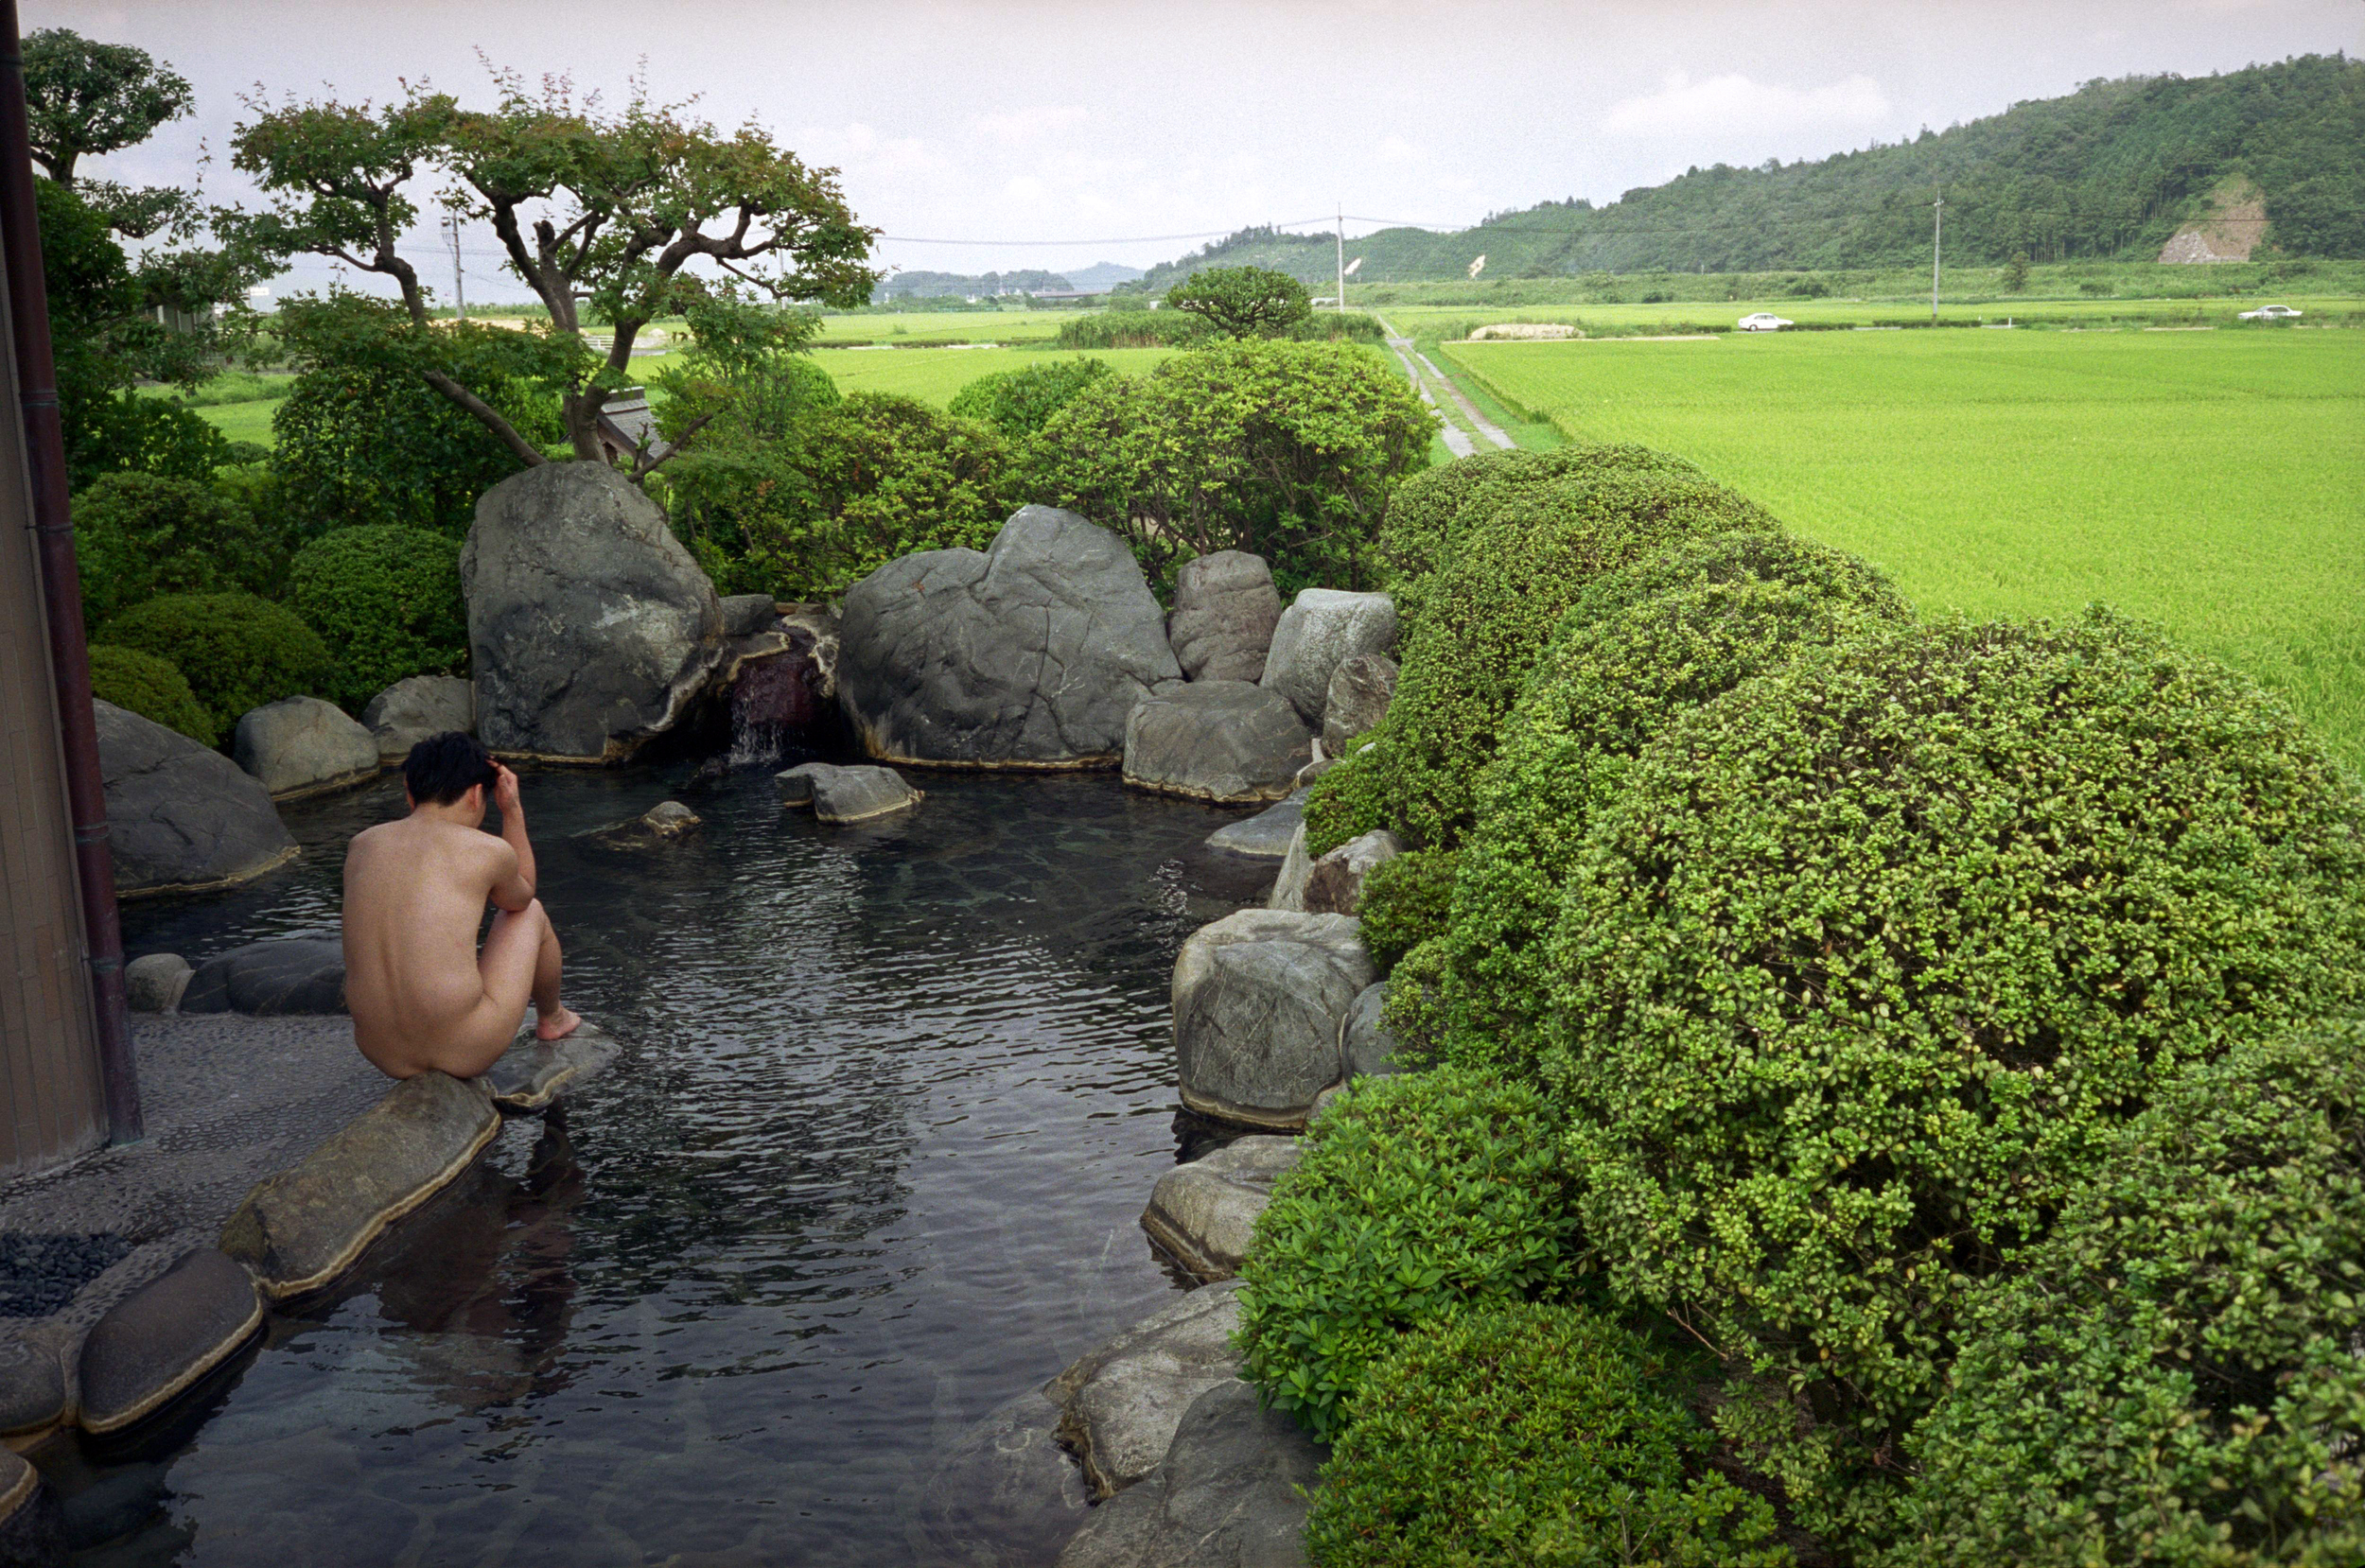 JAPAN. Shimane Prefecture. Open air hot spring, Saiginoyuro. 2000 - 16x12inches £600 - Edition of 6 + 2AP's - 20x24inches £1000 - Edition of 4 + 2AP's